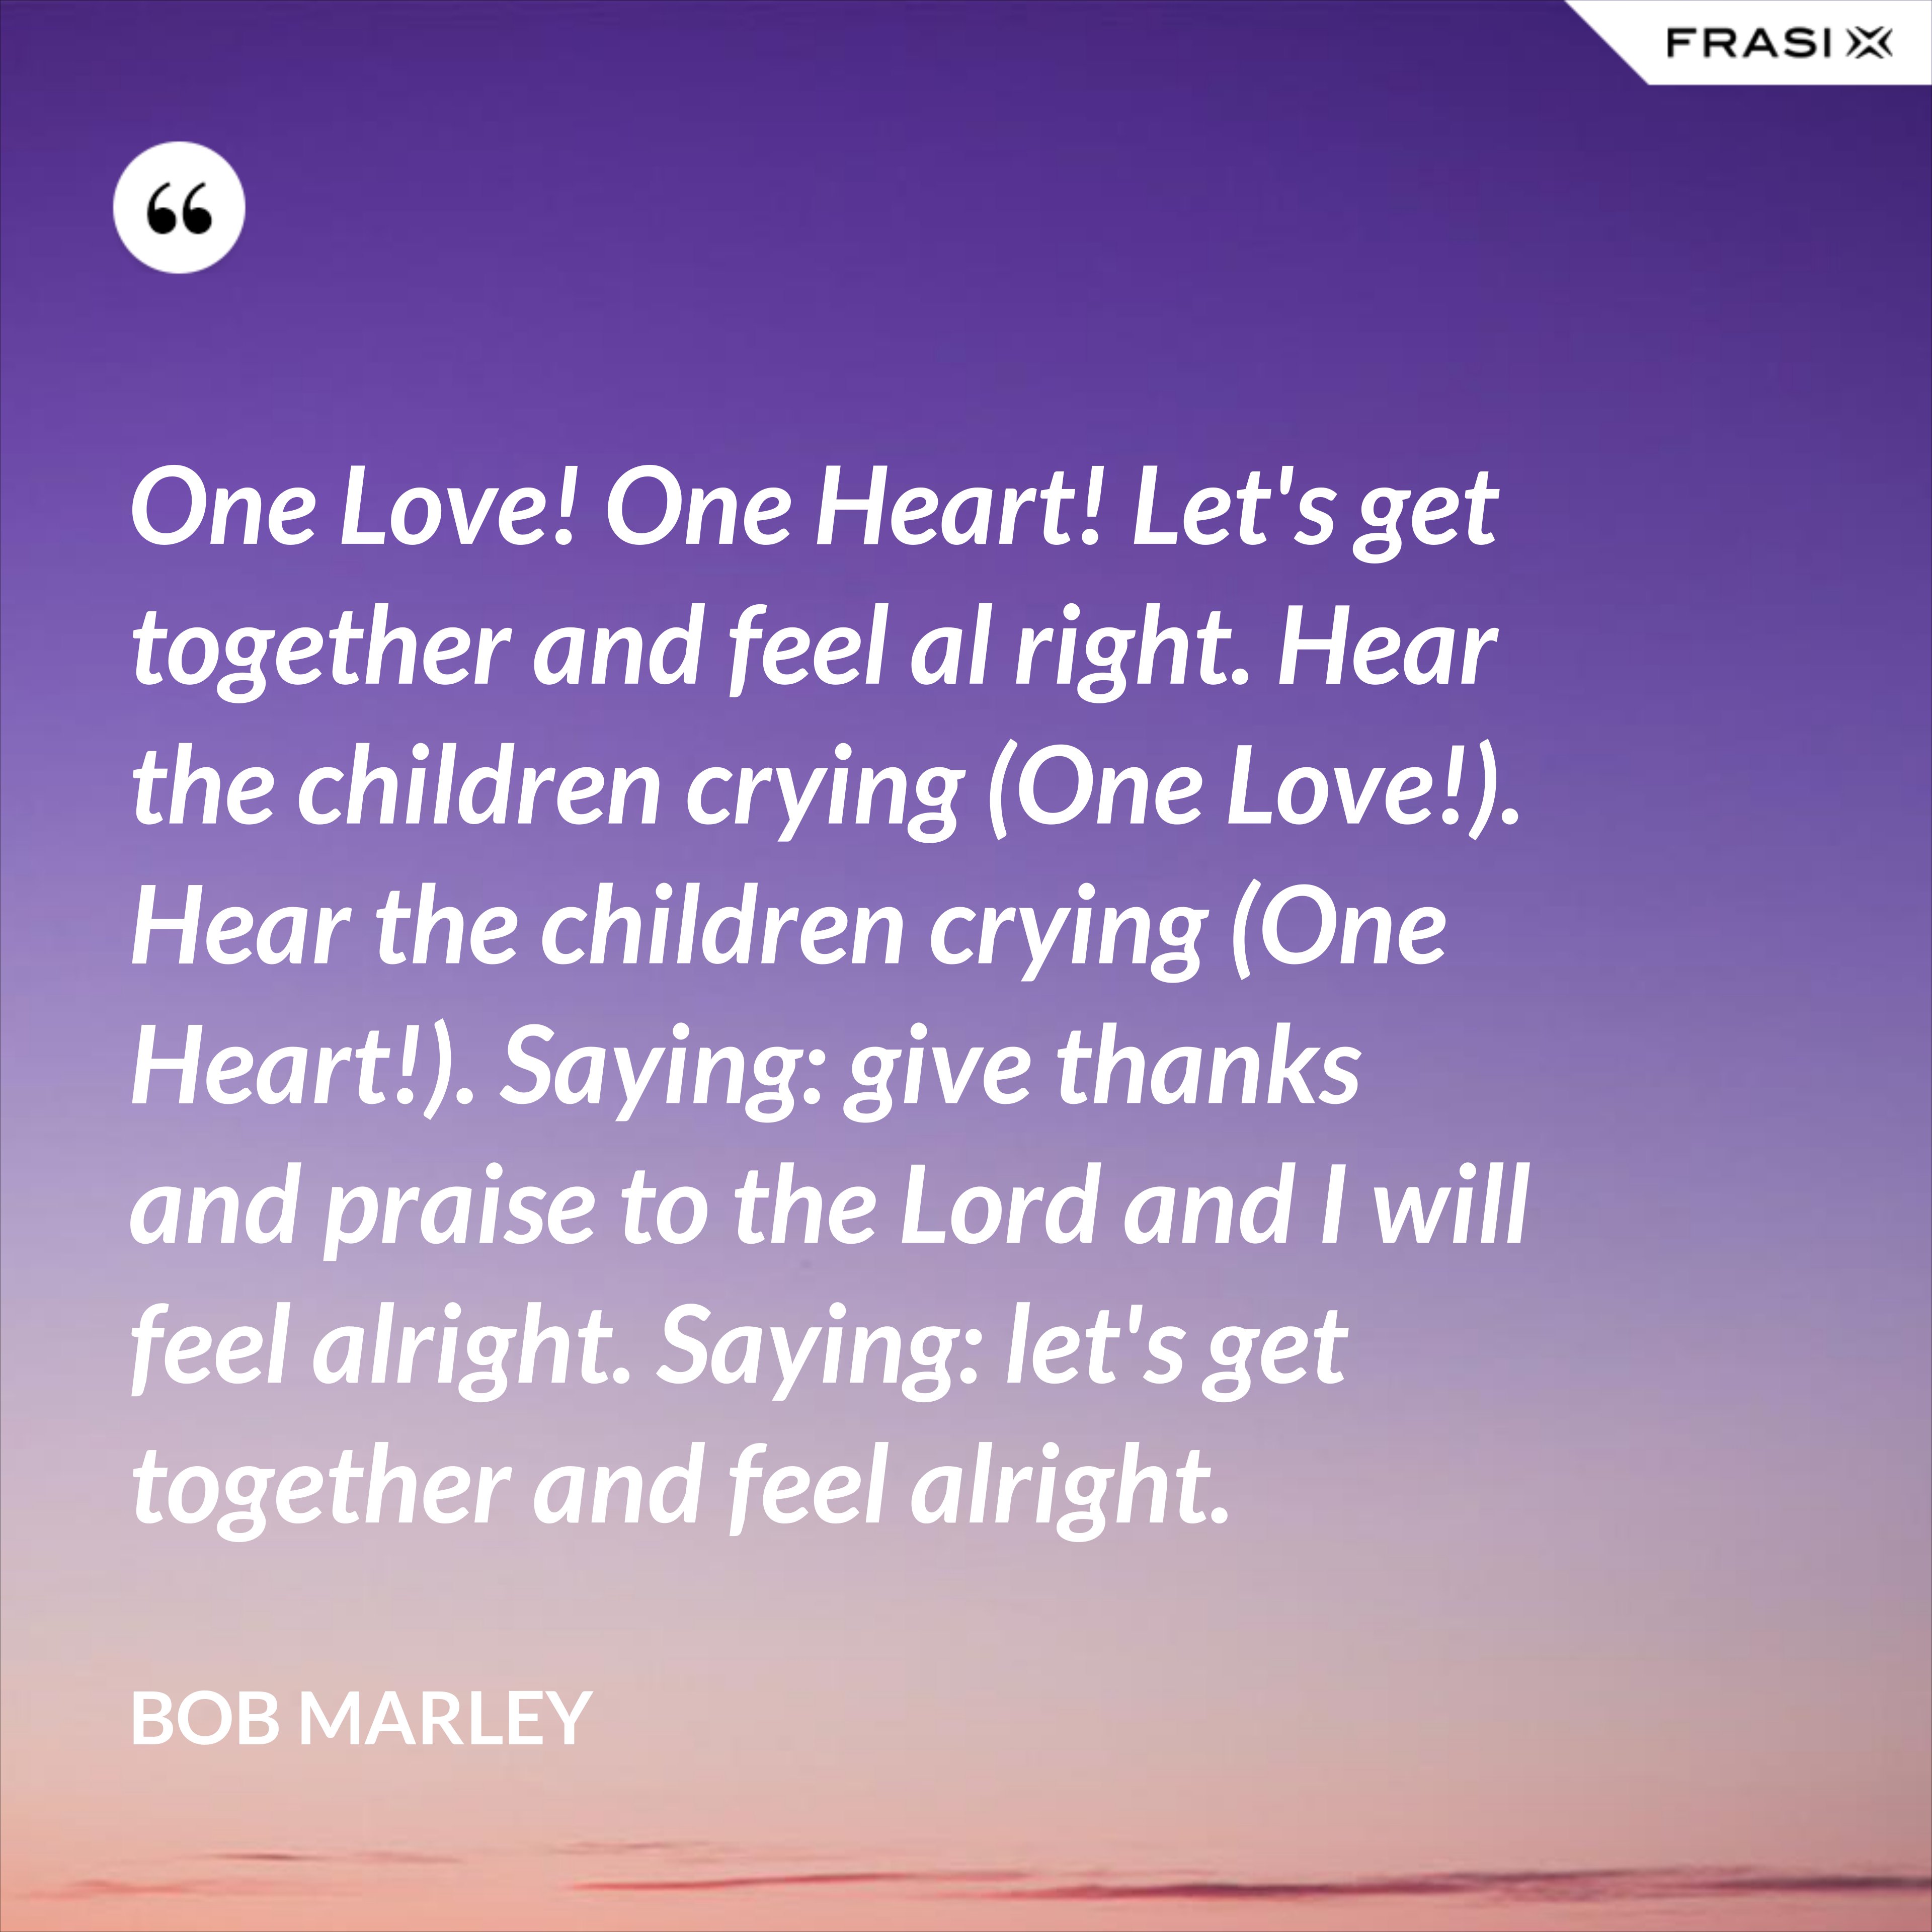 One Love! One Heart! Let's get together and feel al right. Hear the children crying (One Love!). Hear the children crying (One Heart!). Saying: give thanks and praise to the Lord and I will feel alright. Saying: let's get together and feel alright. - Bob Marley